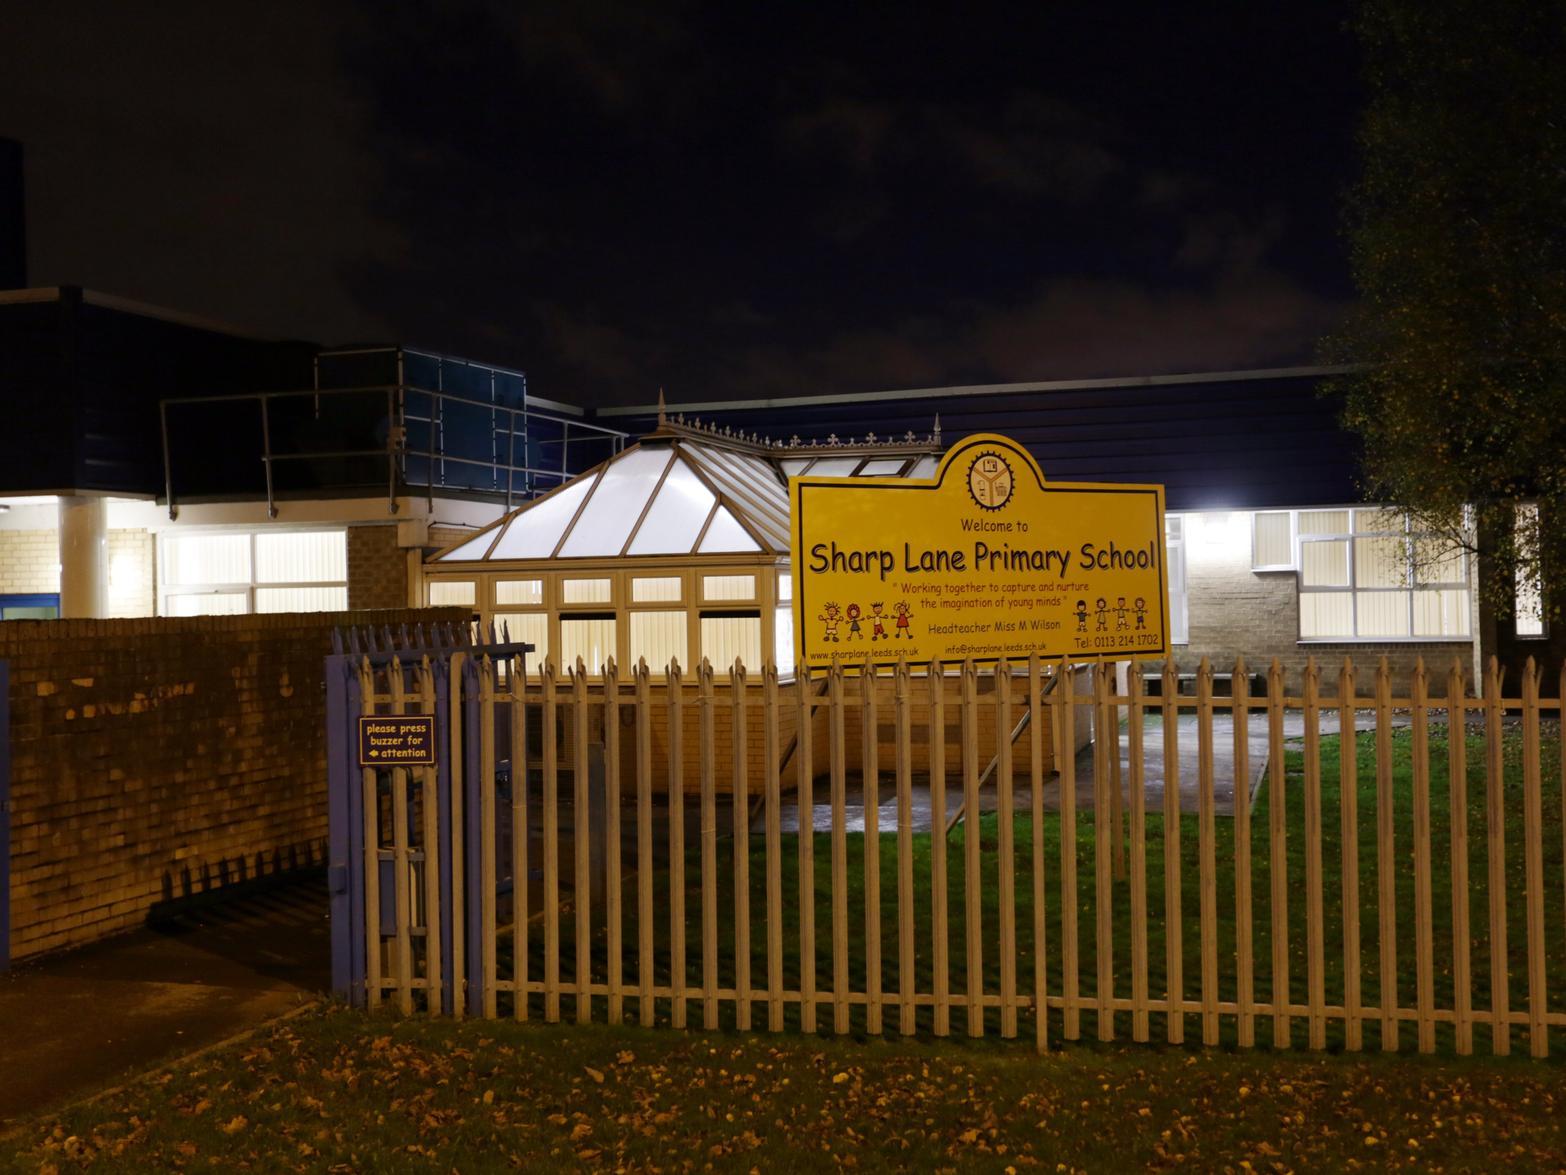 30 per cent of students at Sharp Lane Primary School met their expected standards